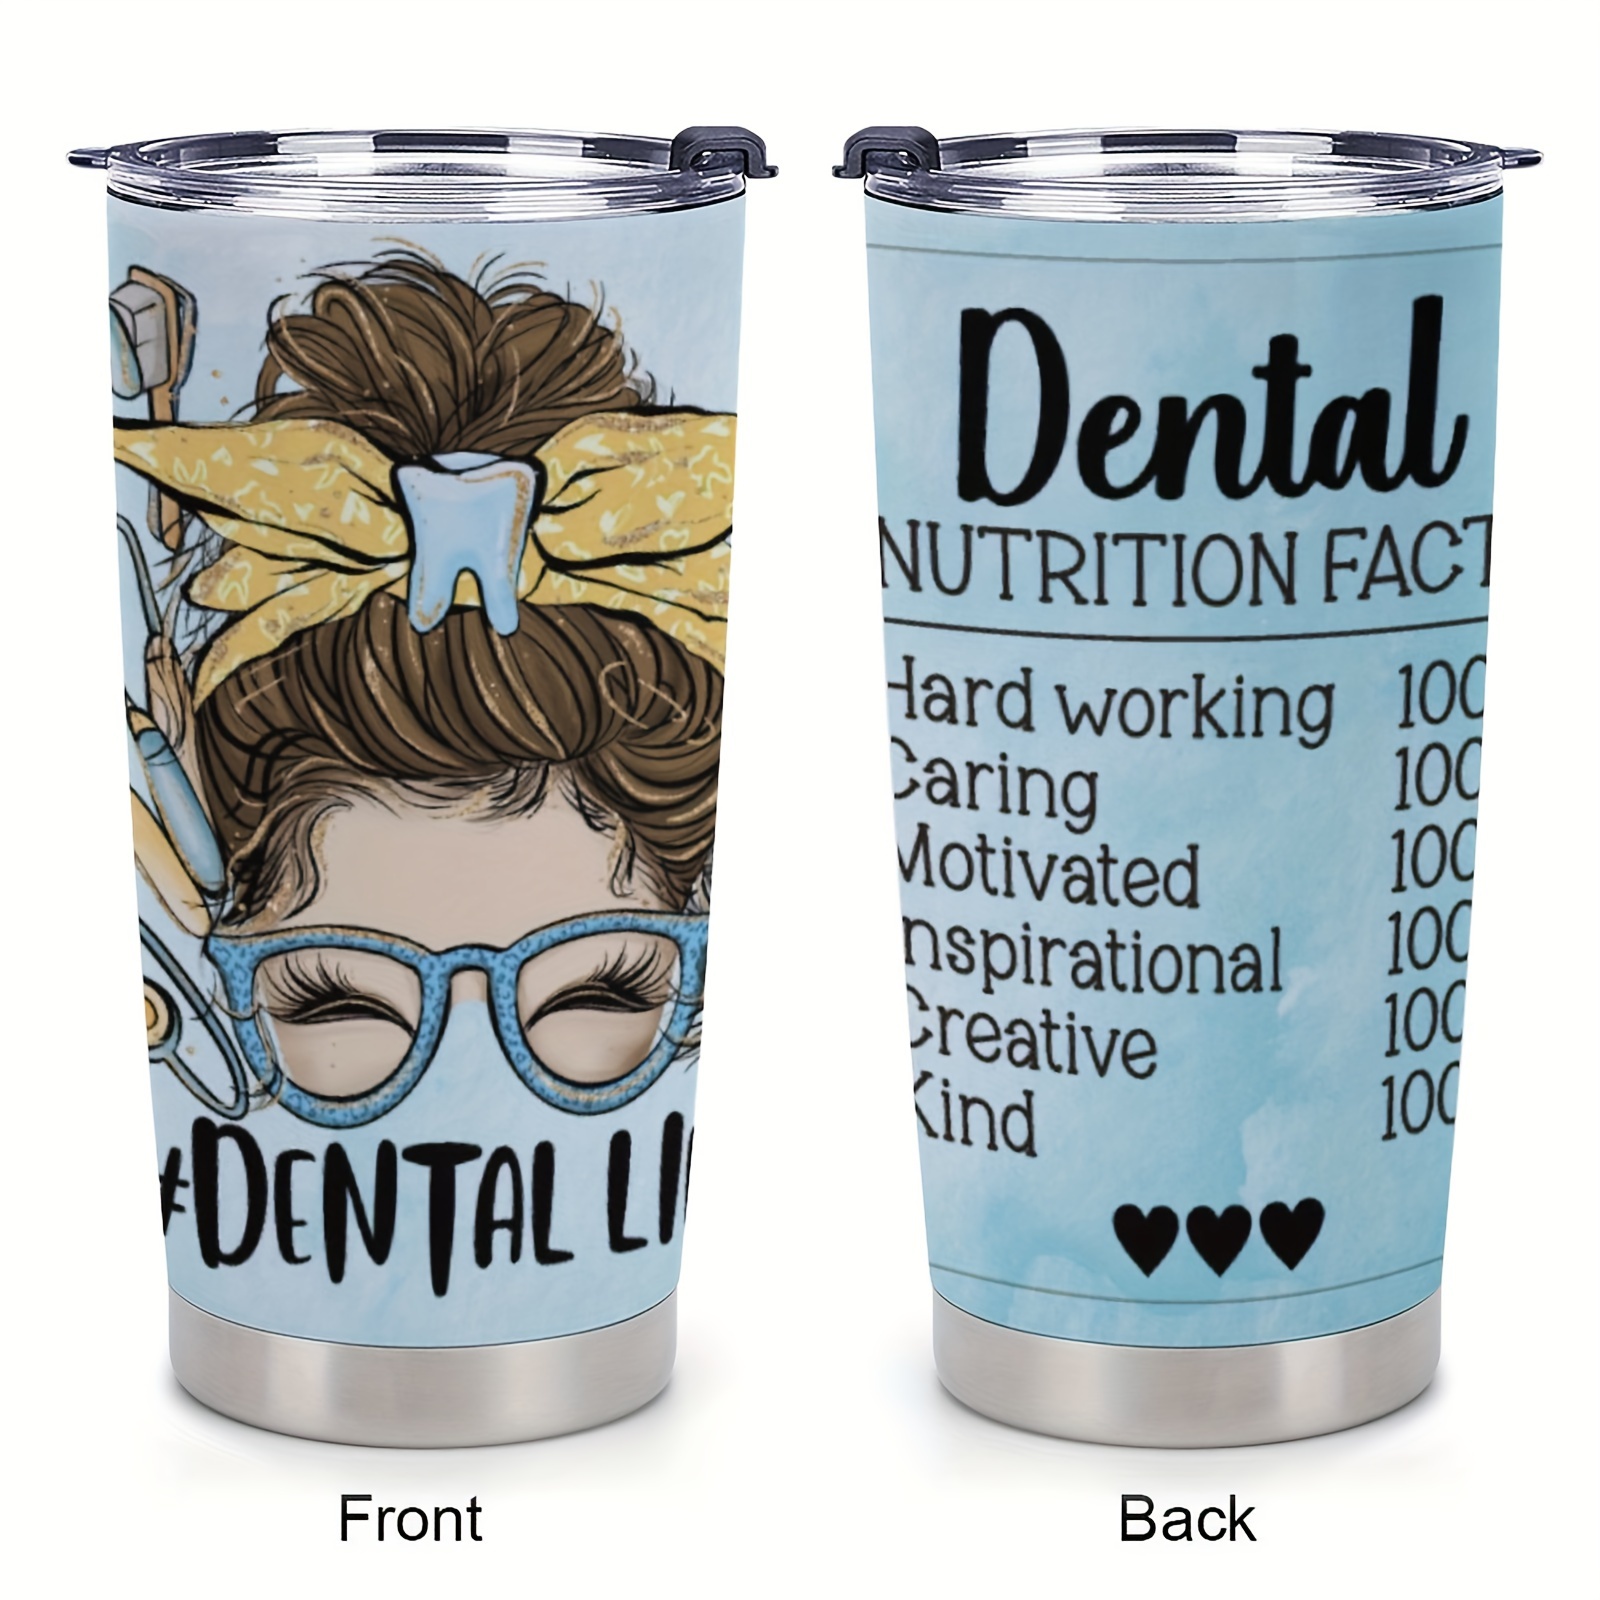 

1pc 20oz, Dental Life Insulation Car Cup, Tumbler Cup With Lid Stainless Steel, Travel Coffee Mugs Insulated Cup, Gift For Parents & Friends